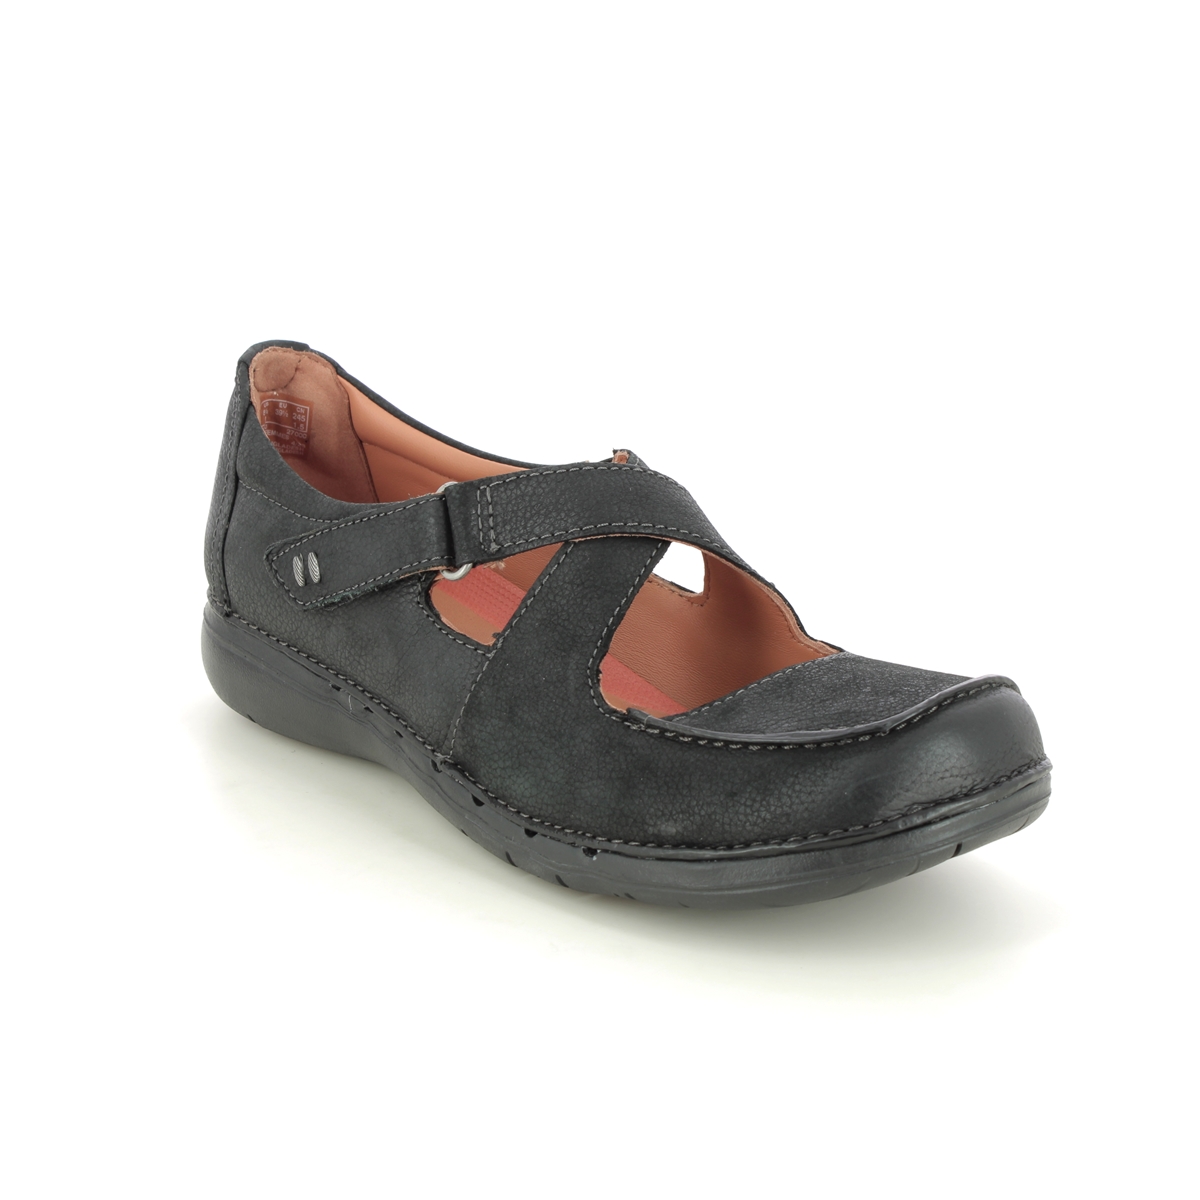 Clarks Un Loop Strap Black Leather Womens Mary Jane Shoes 749704D In Size 6.5 In Plain Black Leather